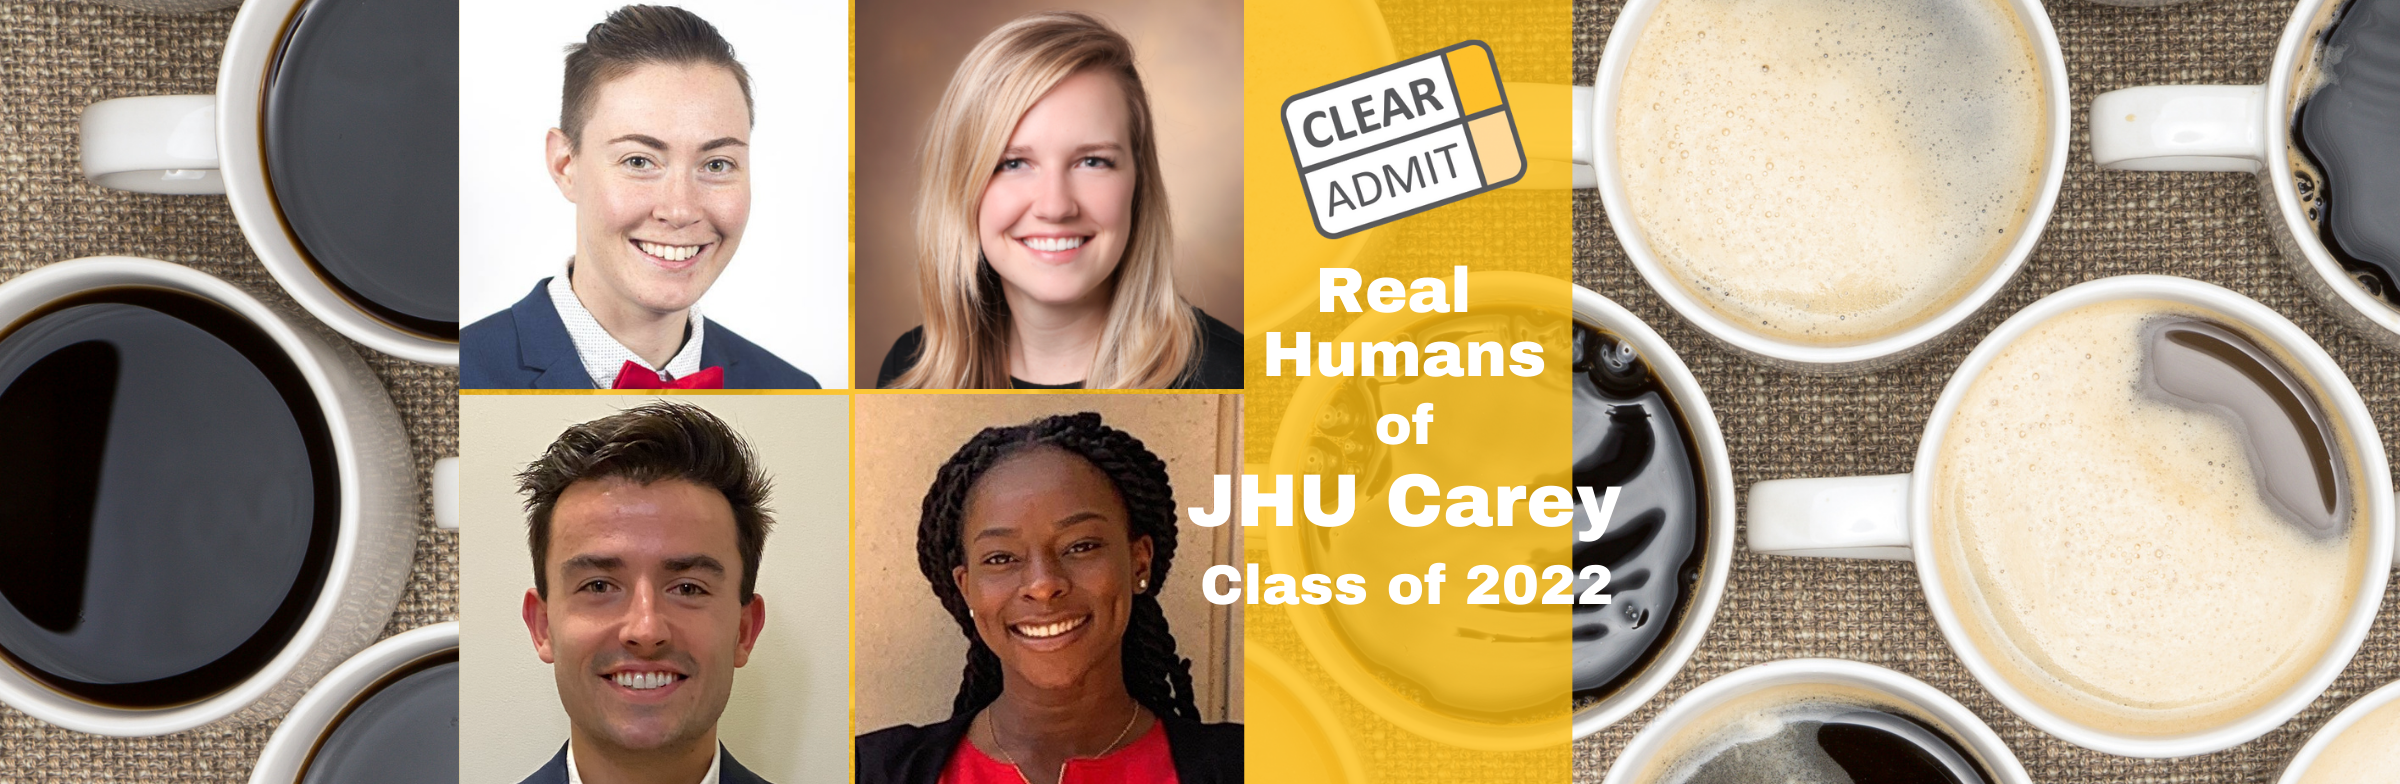 Image for Real Humans of the Johns Hopkins Carey Business School MBA Class of 2022